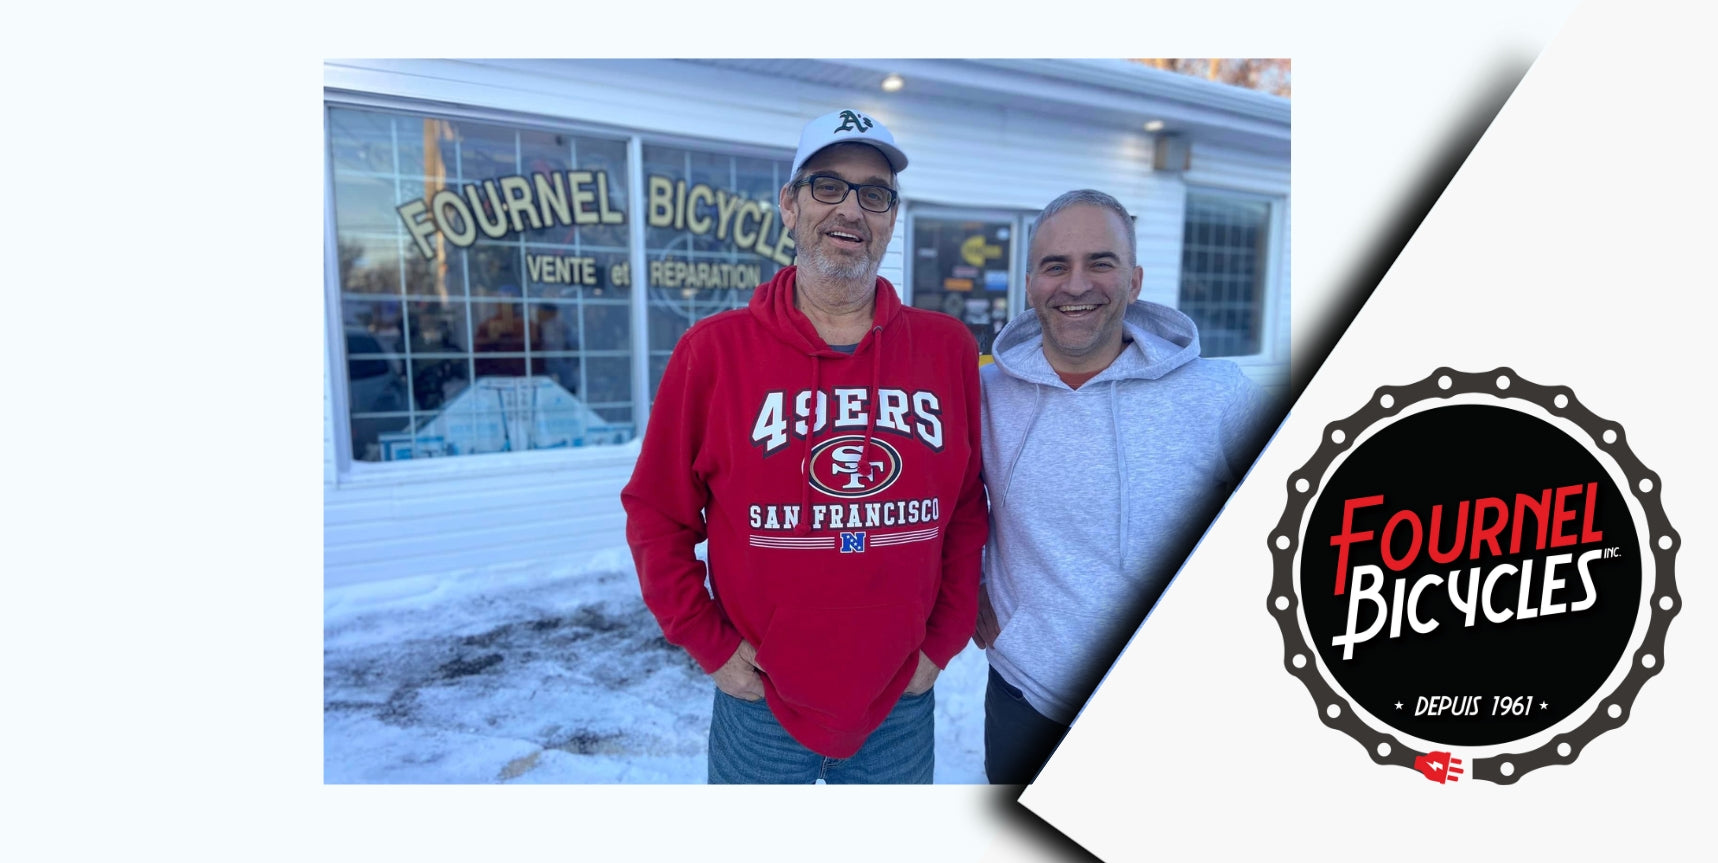 Exclusive interview with Simon from Fournel Bicycles, Quebec. an Envo Inside Dealer